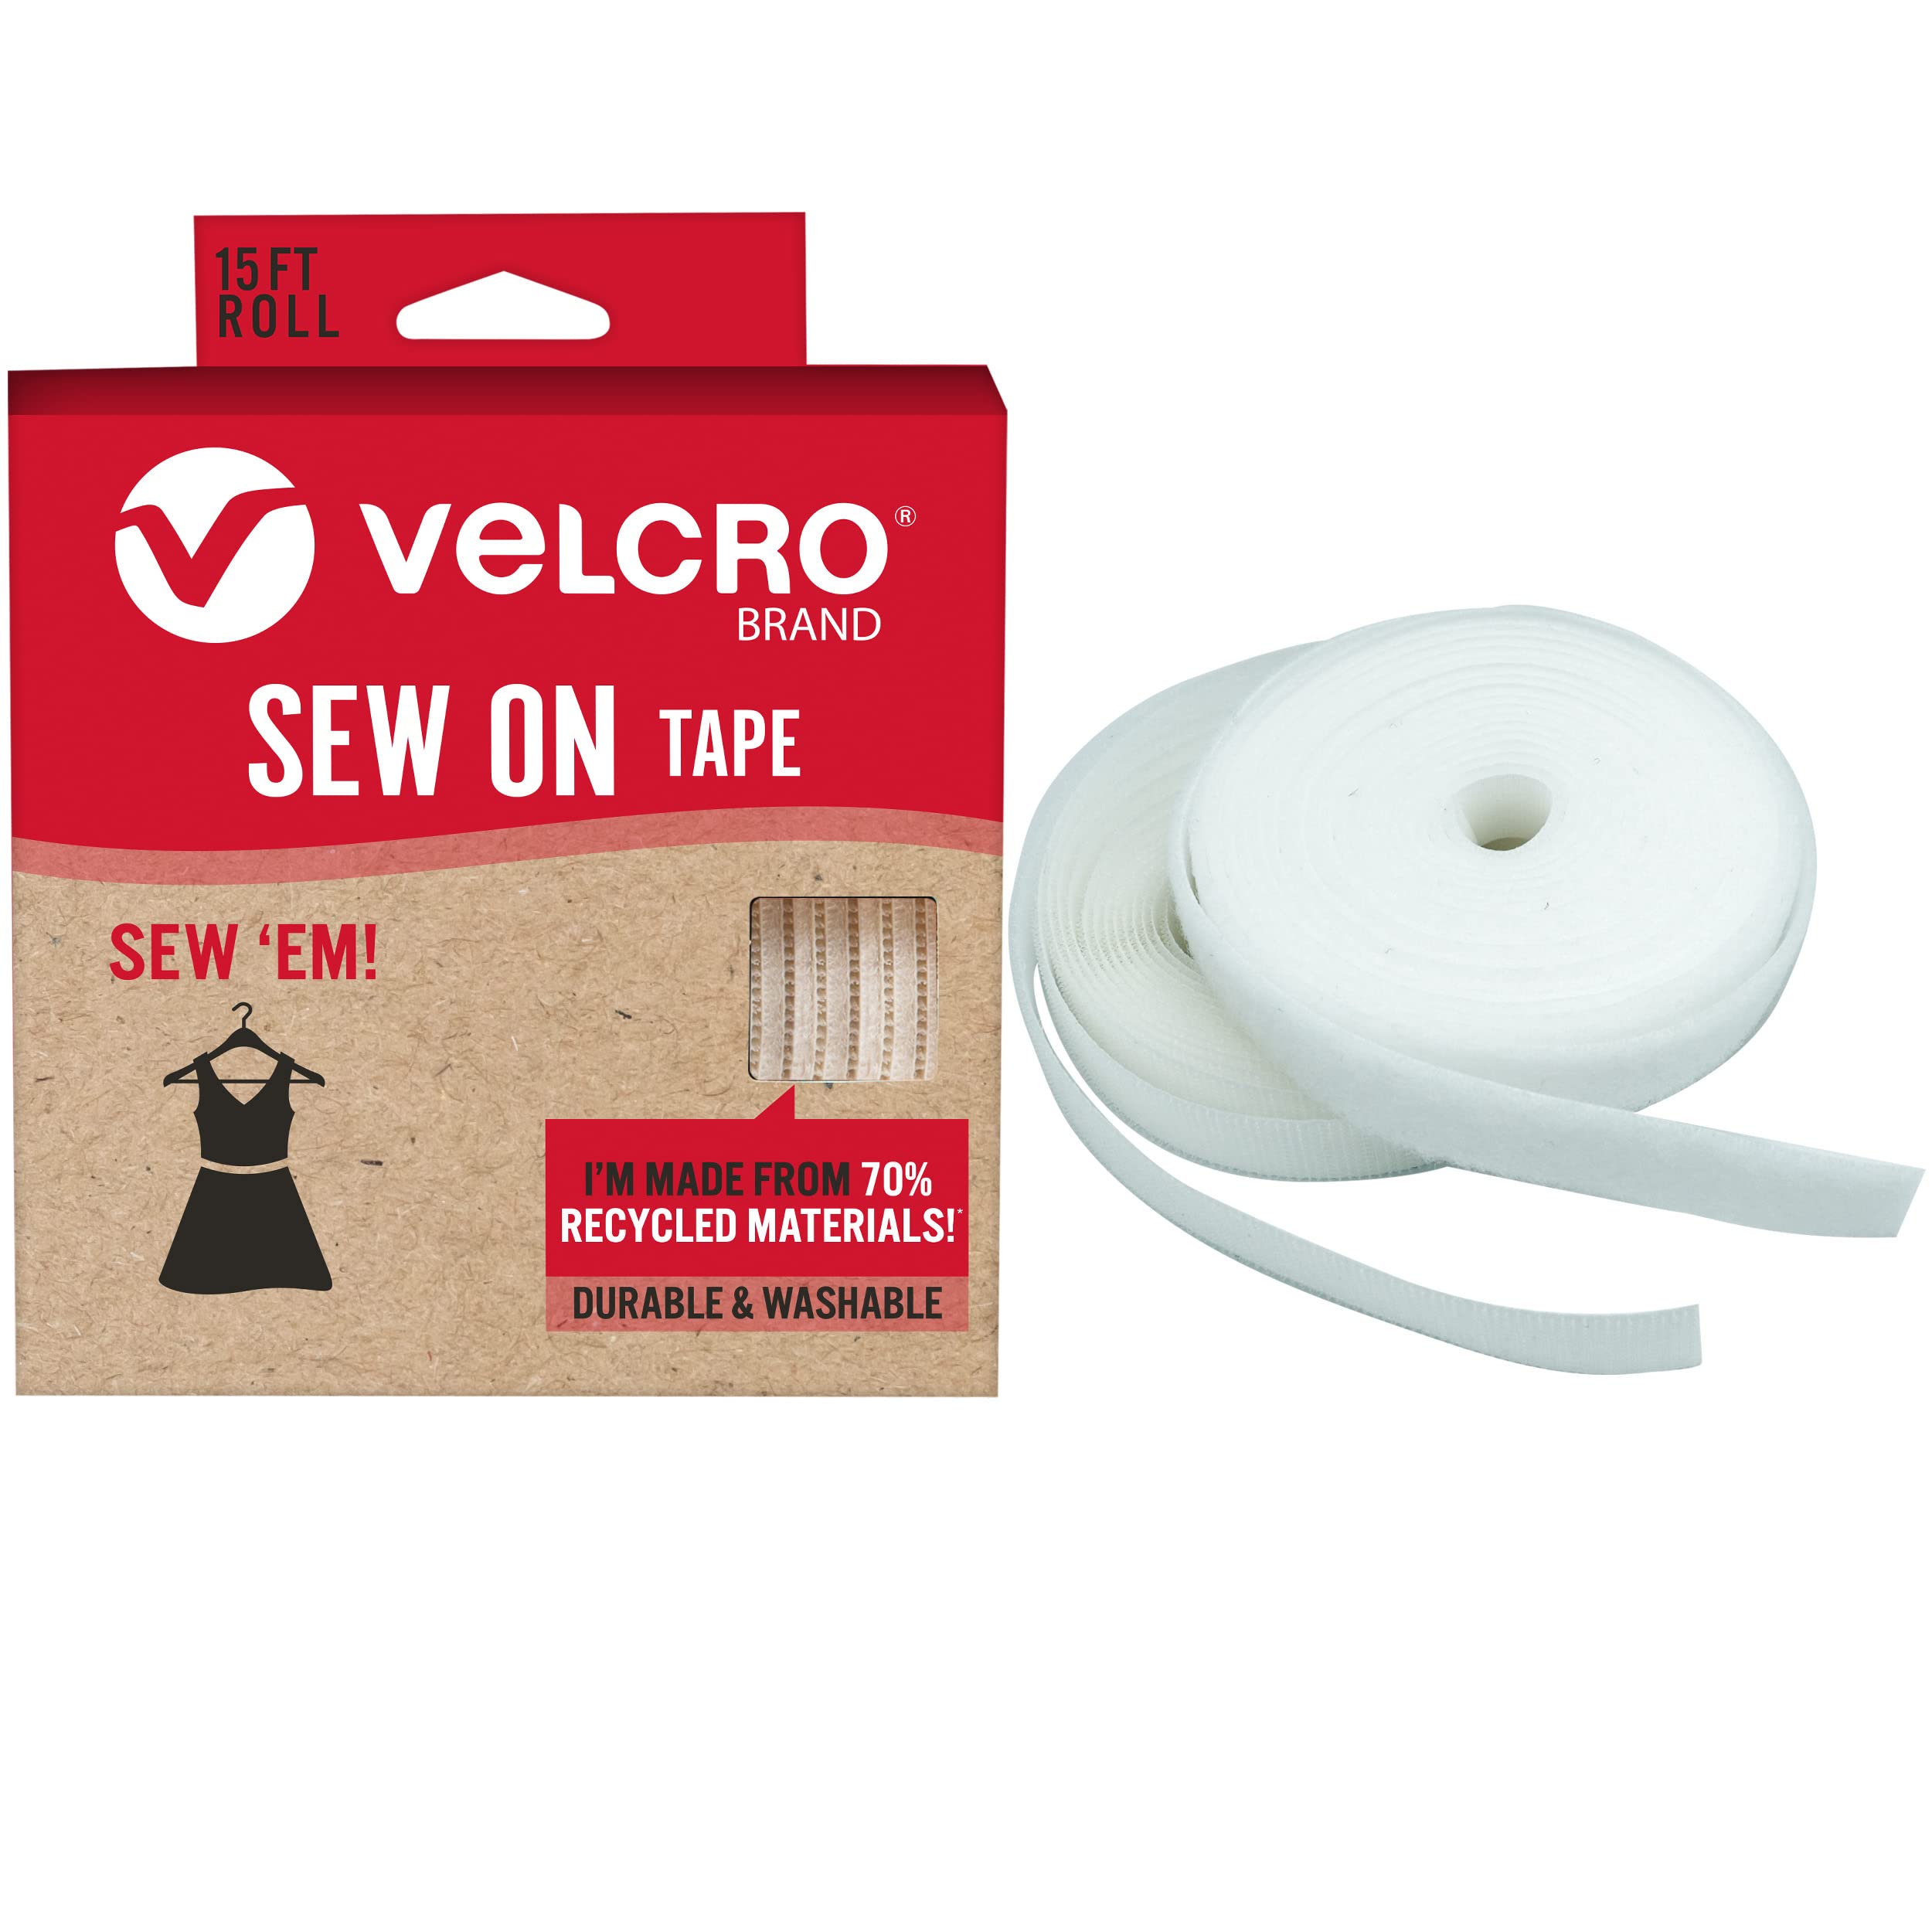 VELCRO Brand Sew On Tape for Clothes and Fabrics | ECO Collection | Non Adhesive, Cut Strips to Custom Length for Sewing | 15ft x 3/4in Roll, White